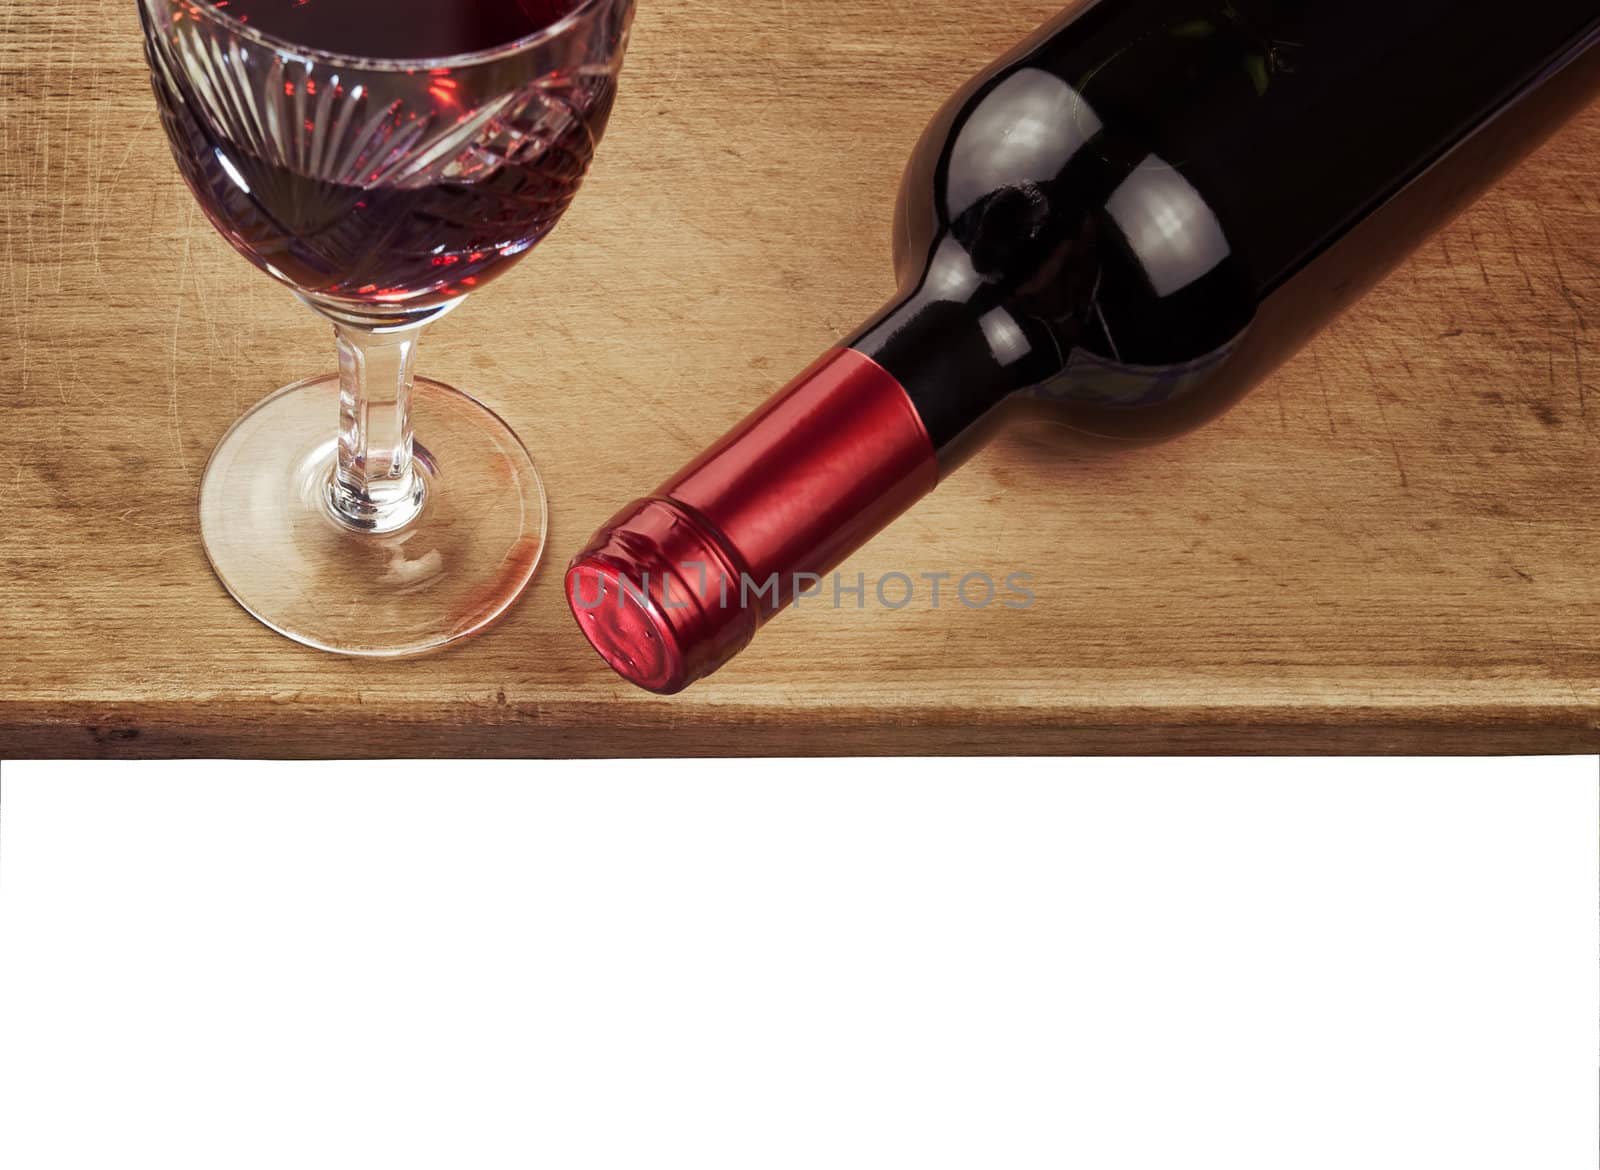 bottle of red wine and glass of wine against a wooden table on white background